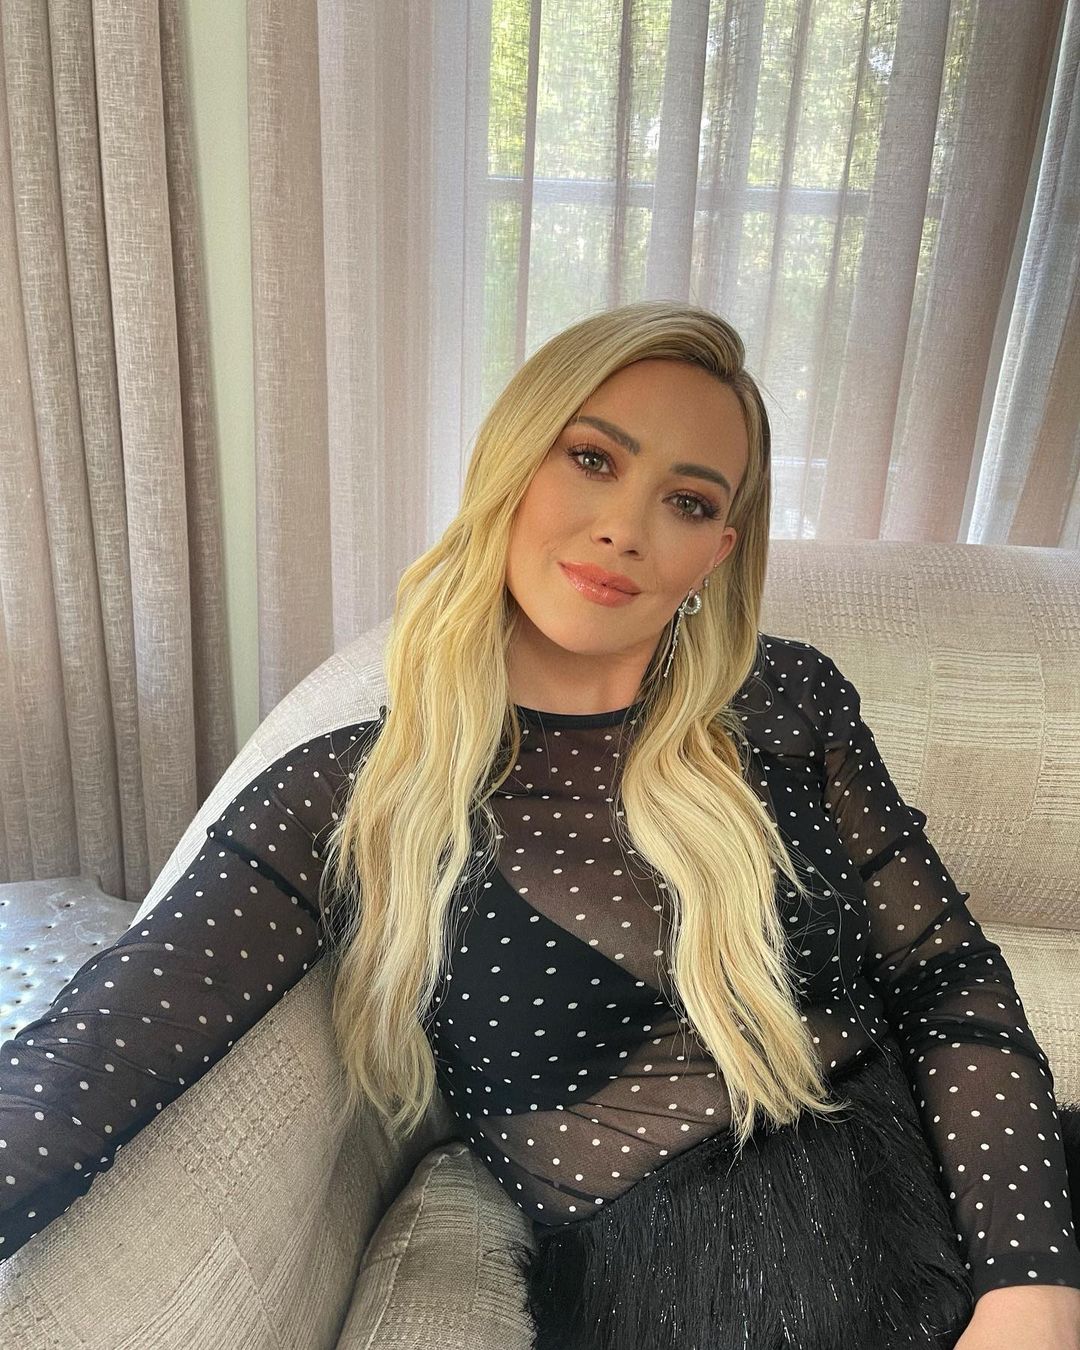 Hilary Duff Joins the Bruno Trend in Instagram Video - MickeyBlog.com